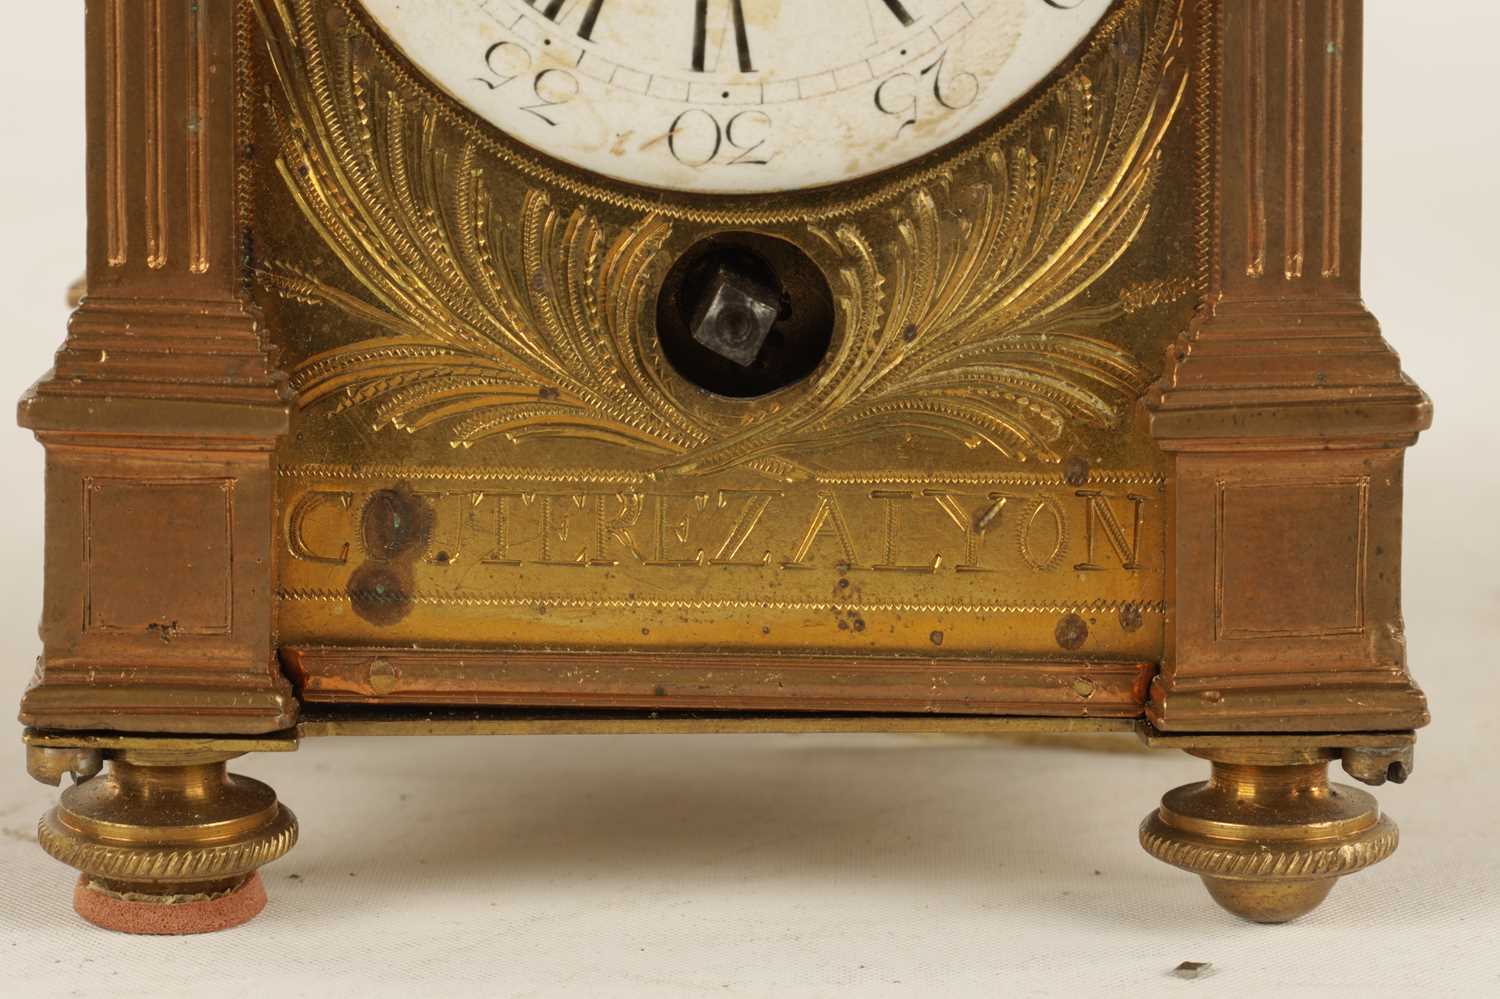 AN EARLY 19TH CENTURY FRENCH CAPUCINE STYLE CARRIAGE/MANTEL CLOCK - Image 4 of 9